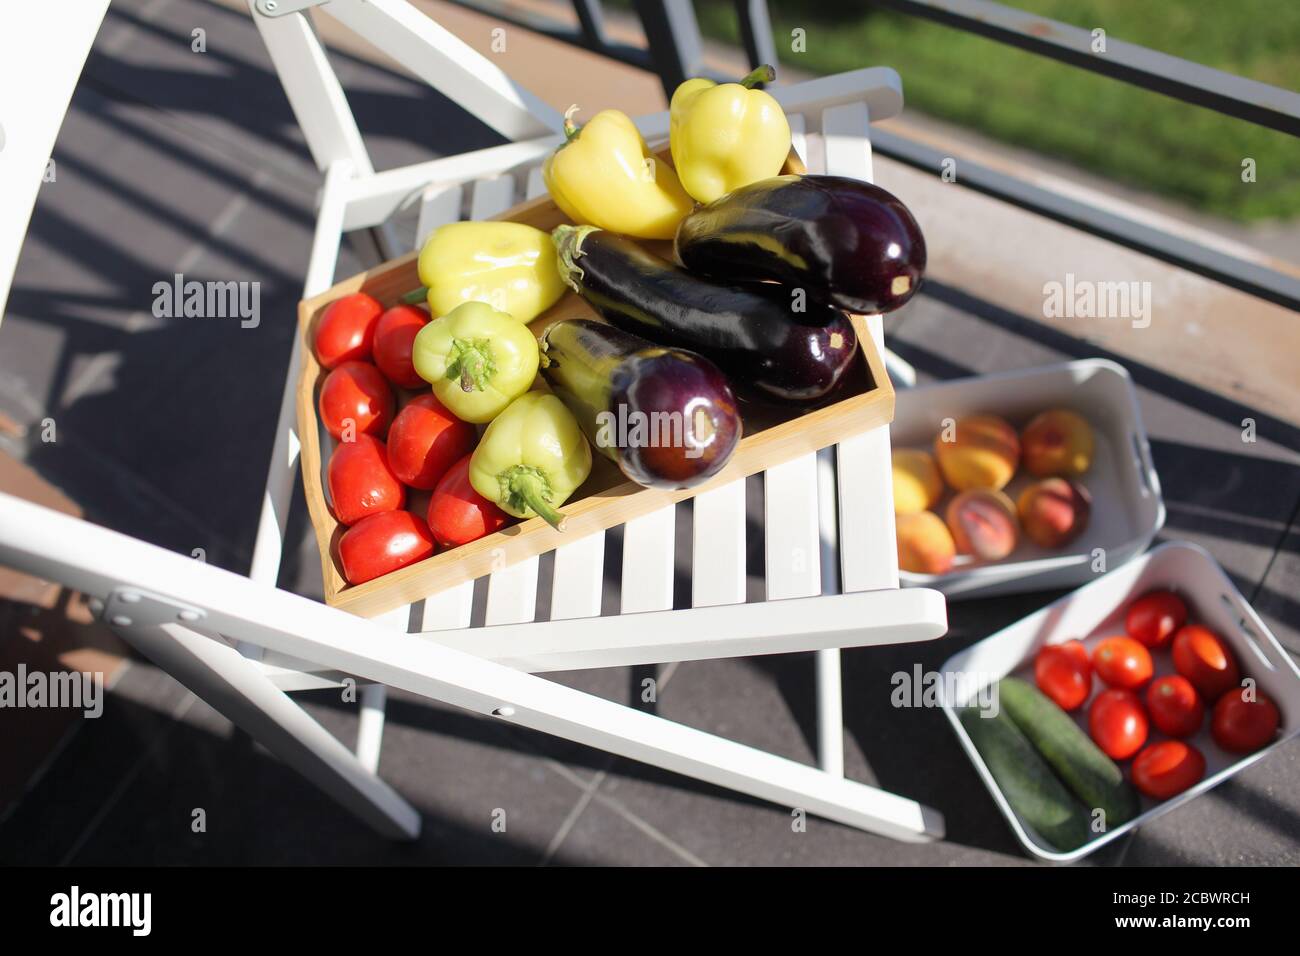 Decontaminating vegetables on a balcony under sun light during COVID pandemic Stock Photo